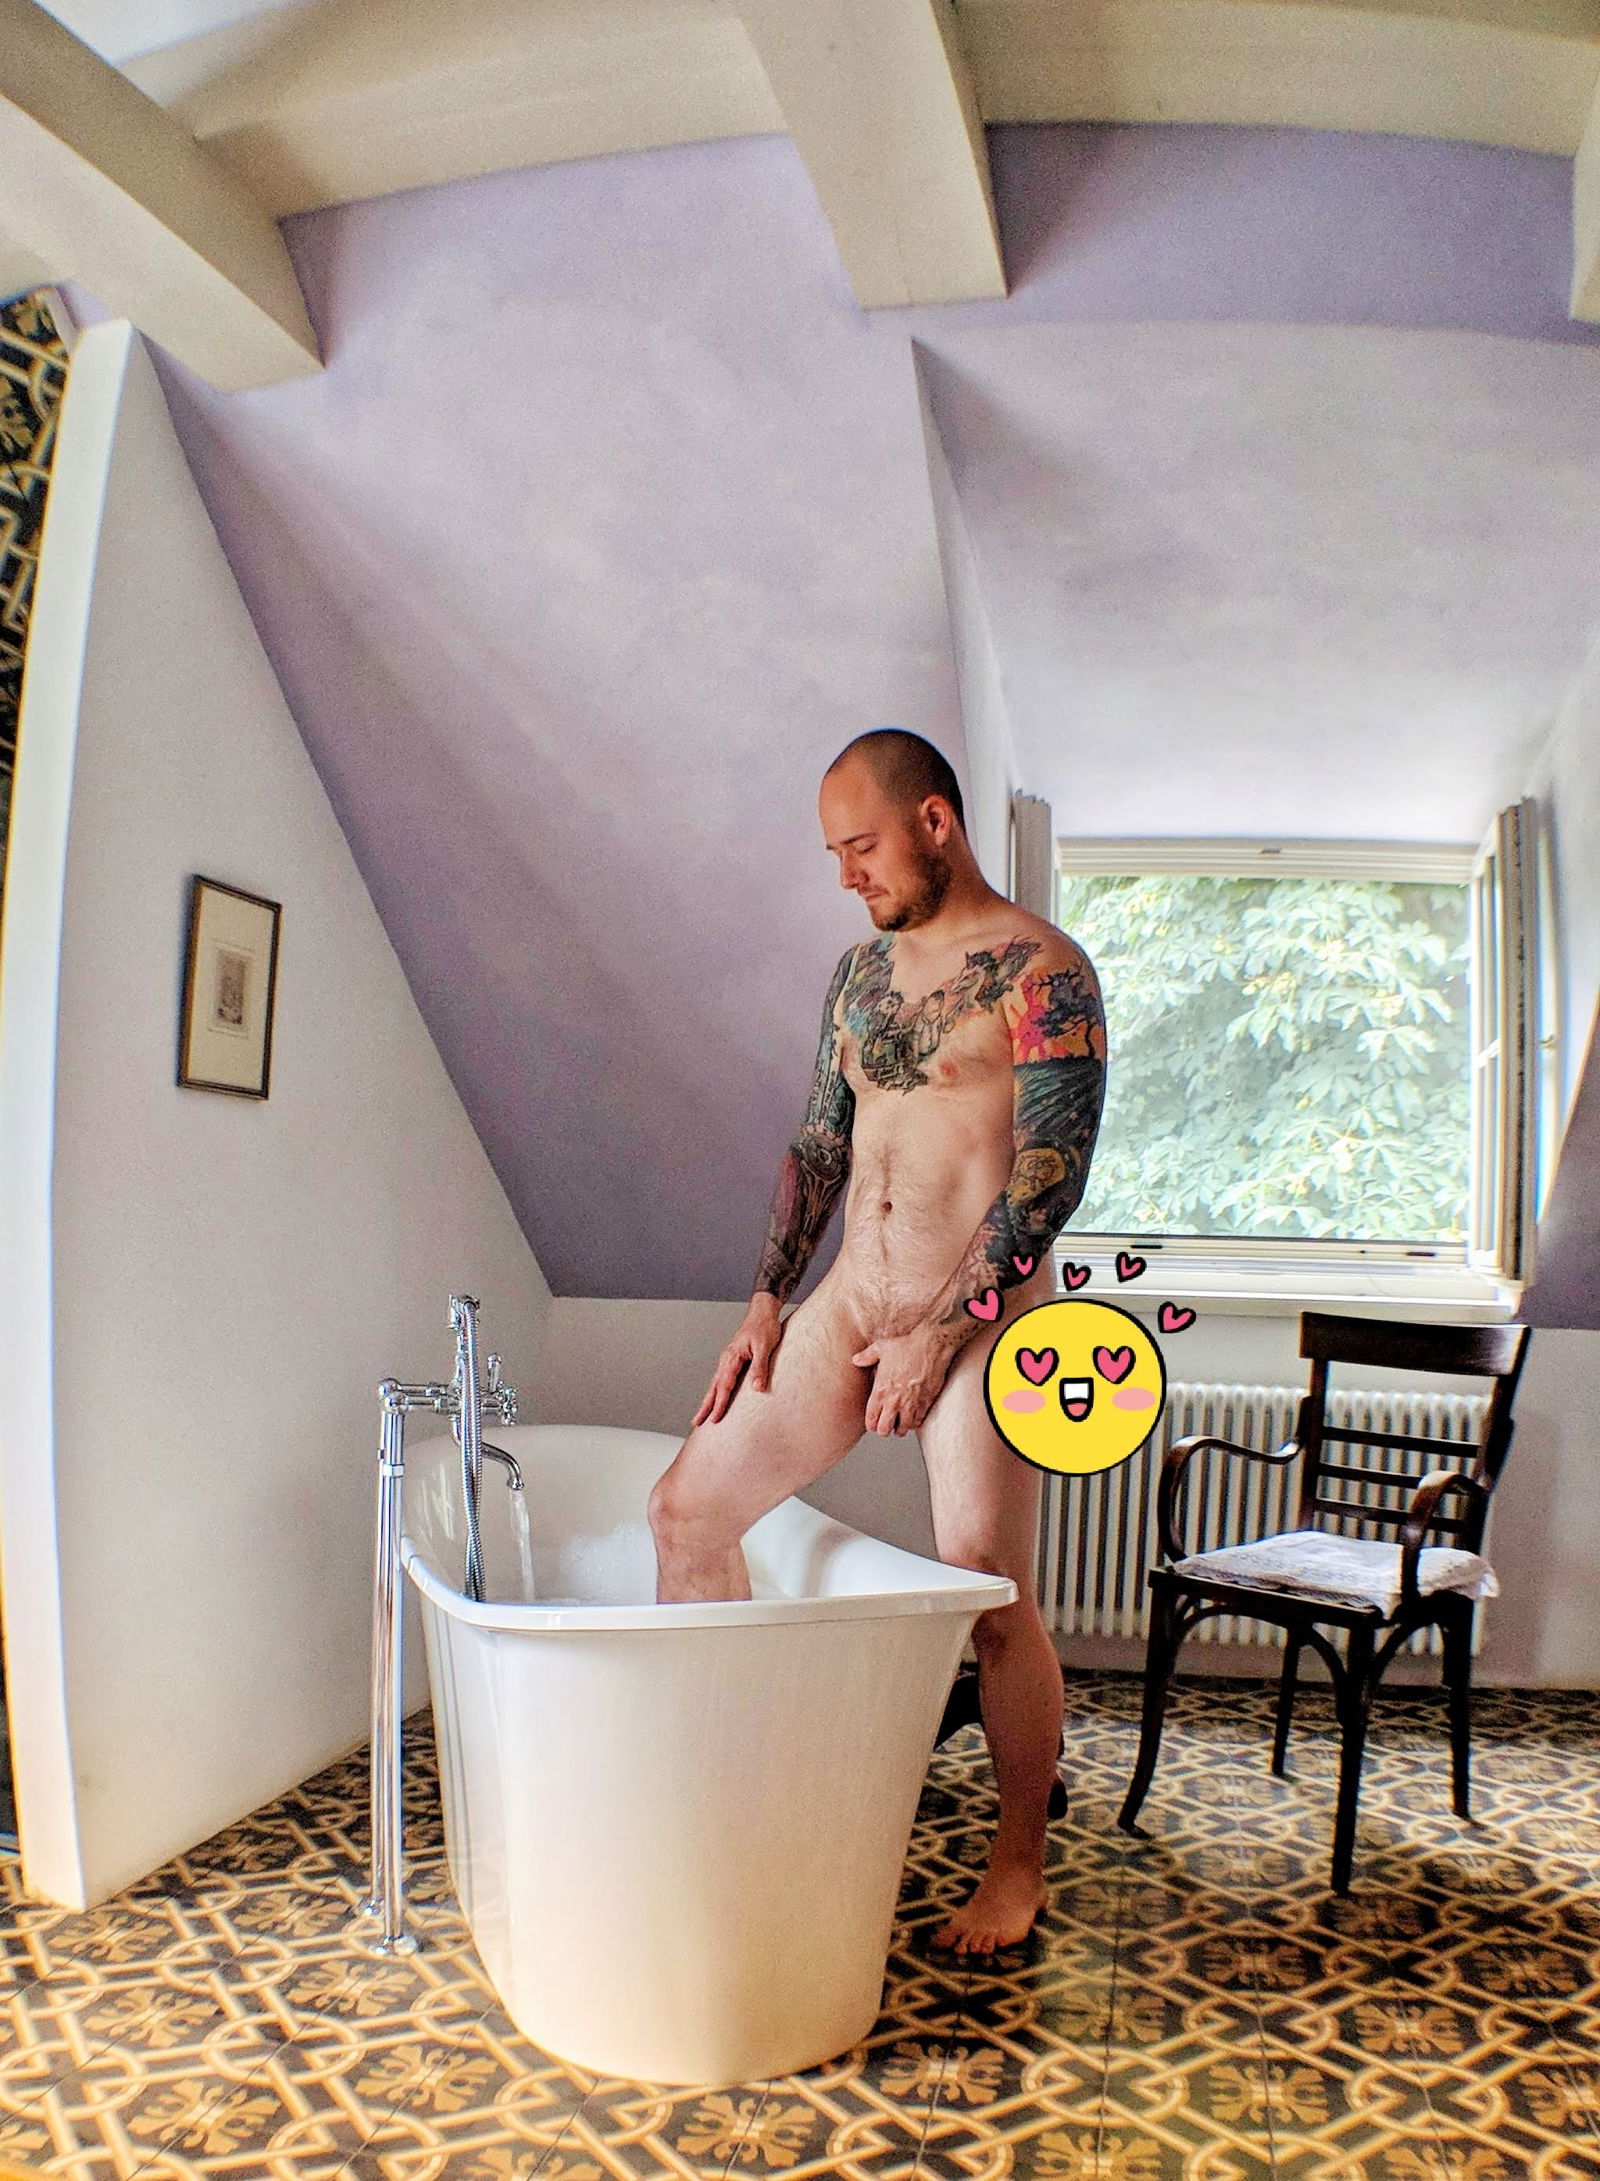 Watch the Photo by alechardyxxx with the username @alechardyxxx, who is a star user, posted on July 25, 2019